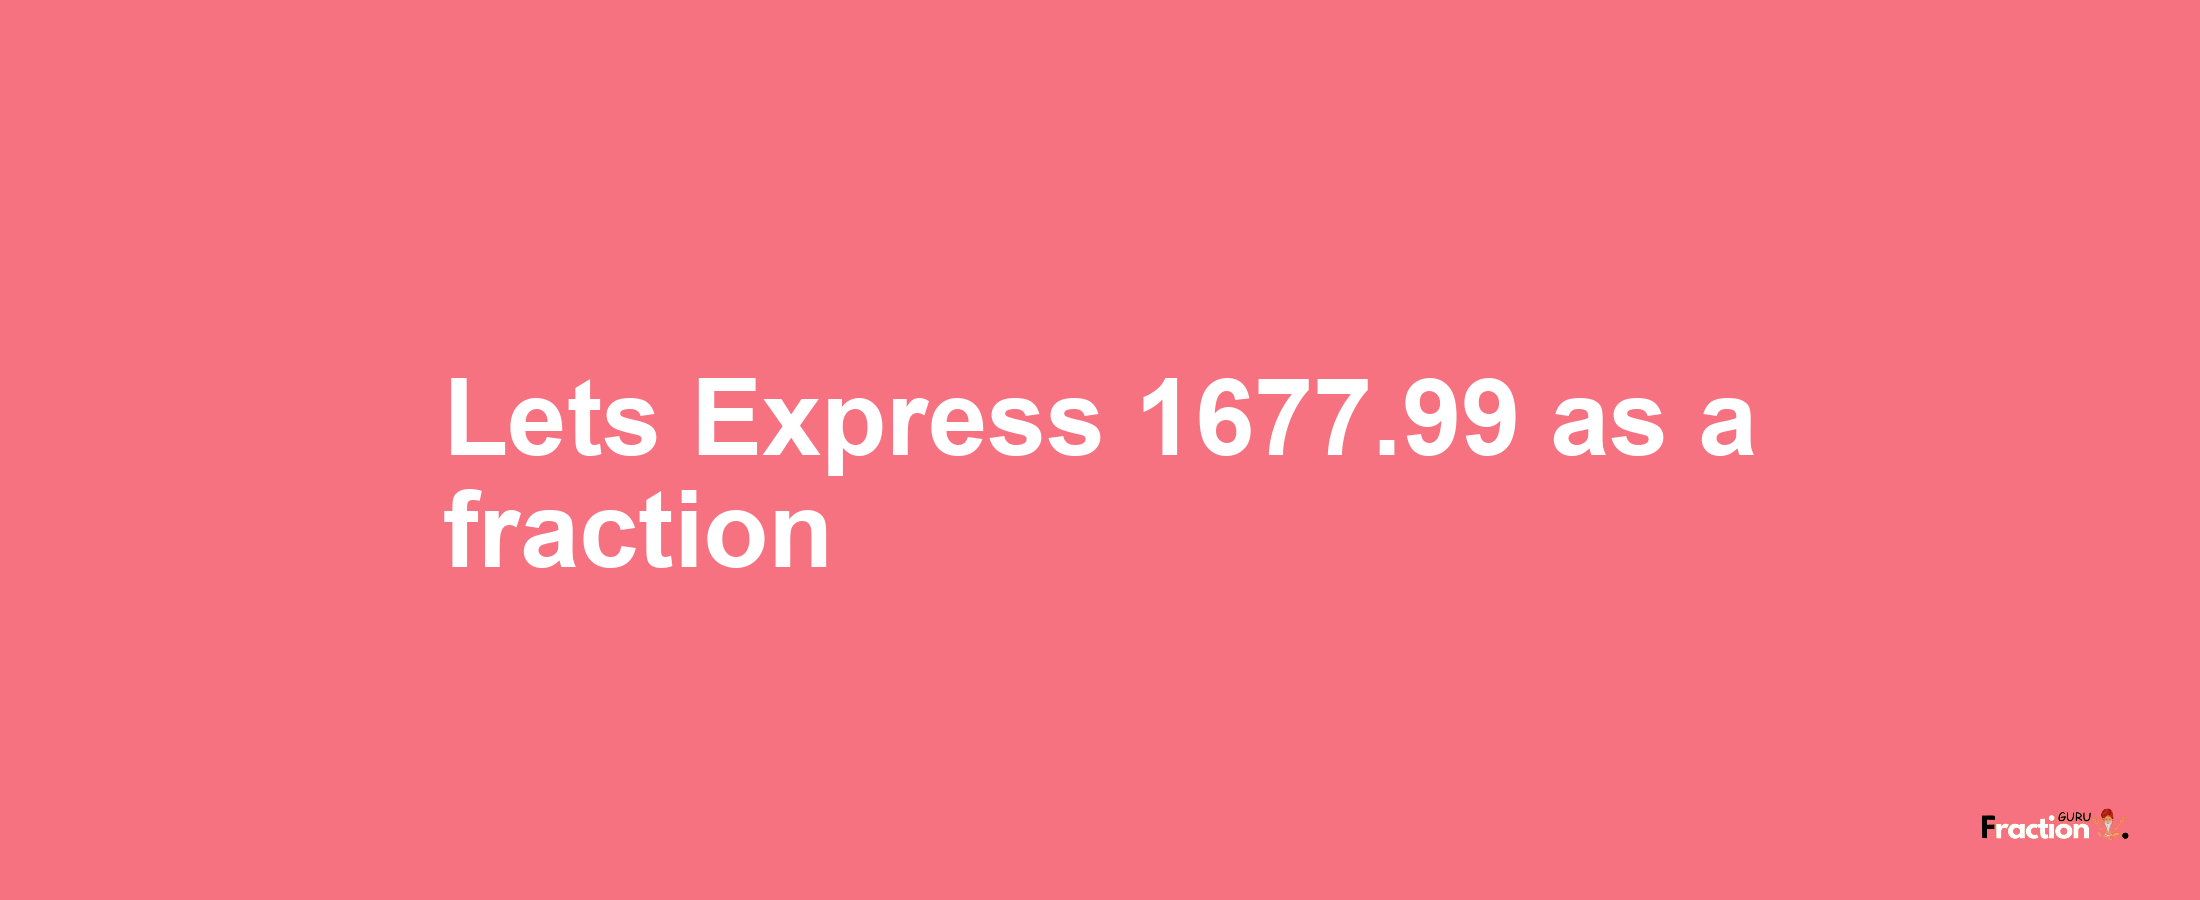 Lets Express 1677.99 as afraction